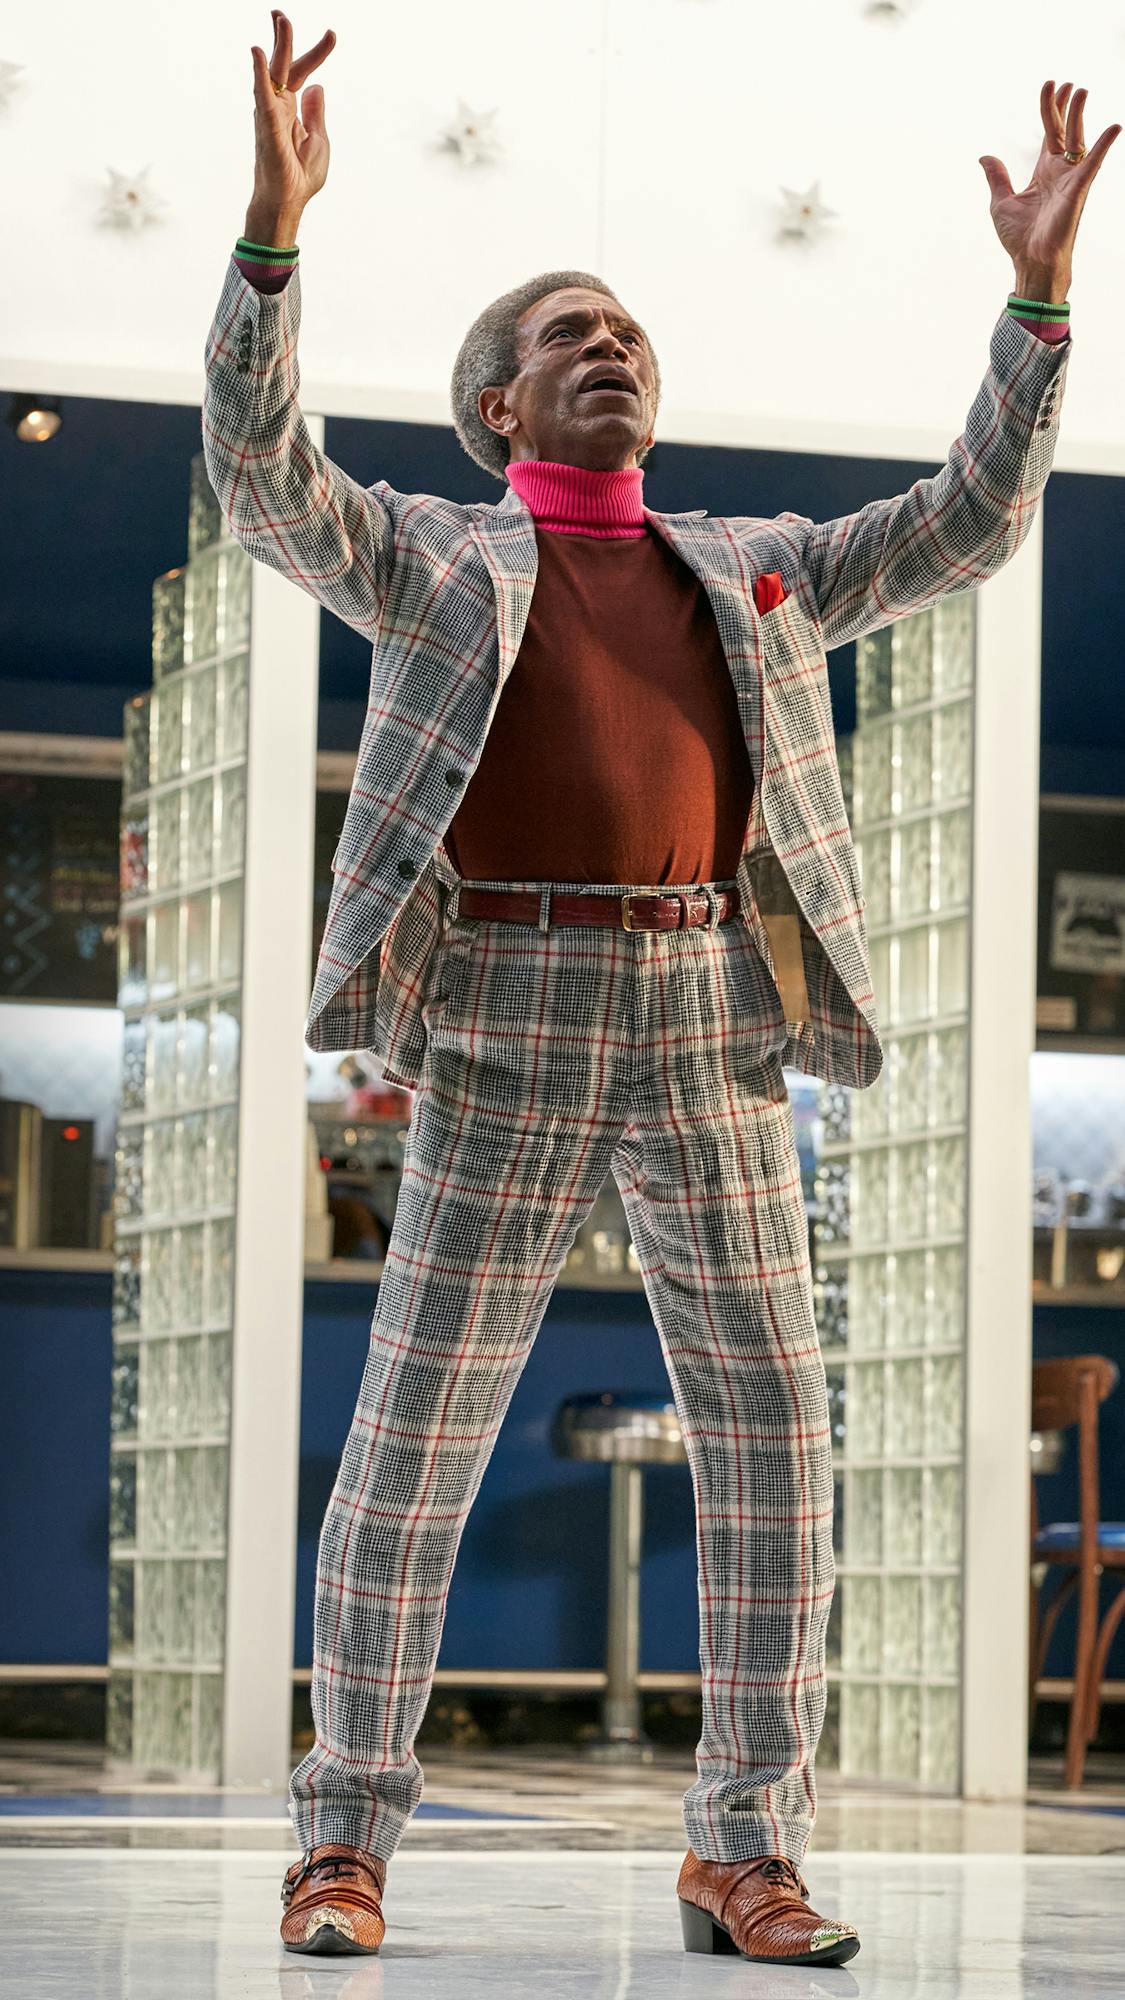 André De Shields wears a plaid suit and a hot pink turtle neck and stands outside the Moondance Diner.